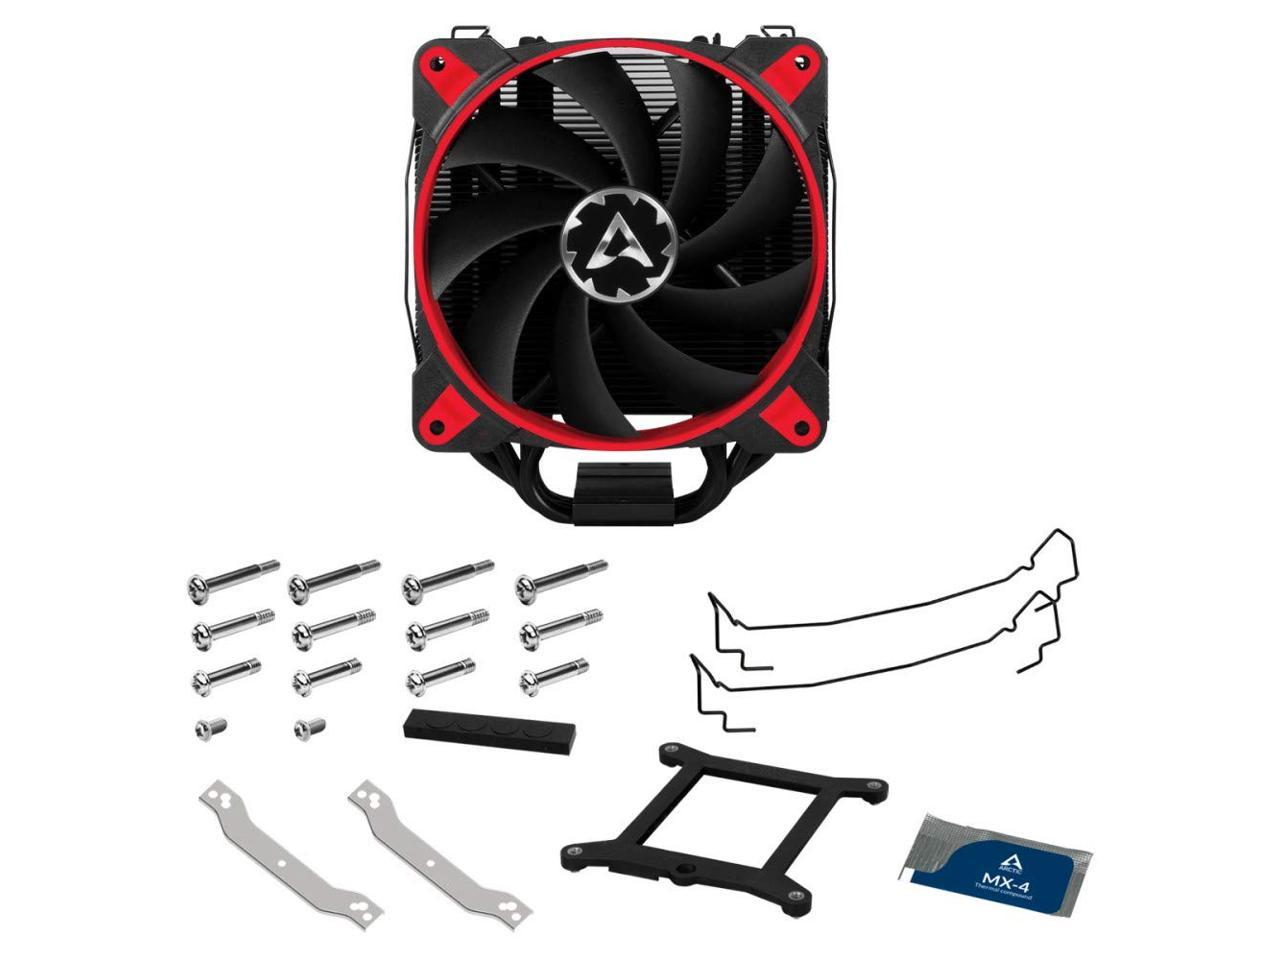 ARCTIC Freezer 34 eSports DUO Edition - Tower CPU Cooler with Push-Pull Configuration I Silent 3-Phase-Motor and wide range of regulation 200 to 2100 RPM - Includes 2 low noise PWM 120 mm Fans – Red